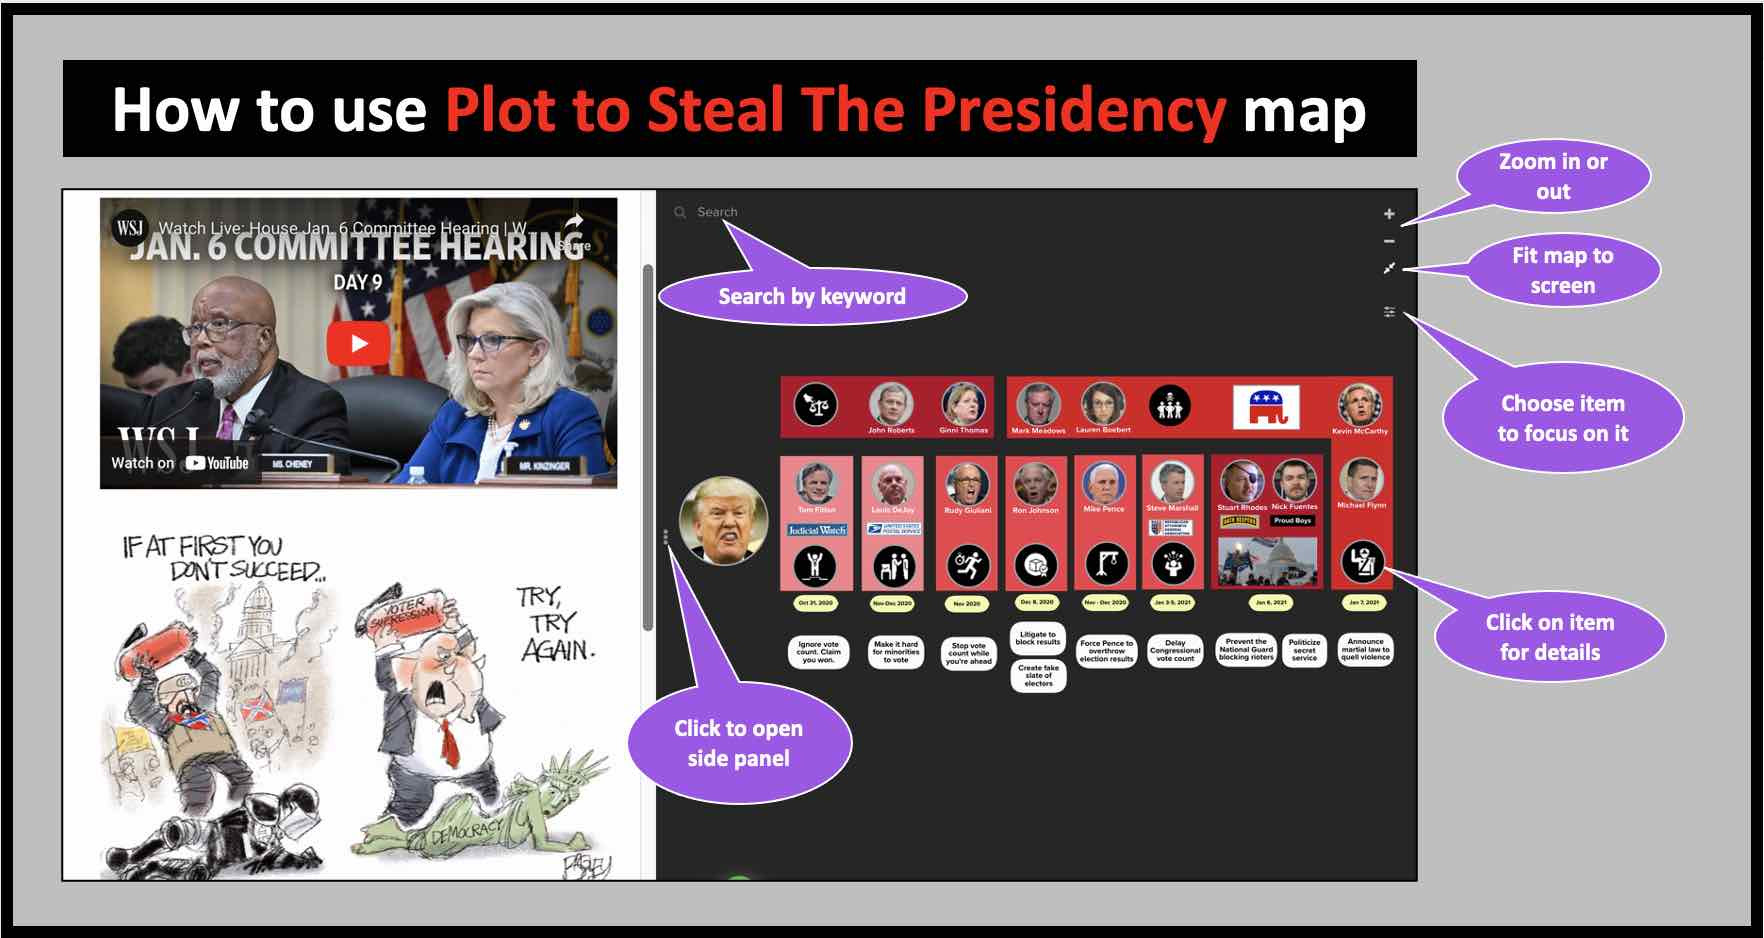 How to use the PLOT TO STEAL PRESIDENCY map